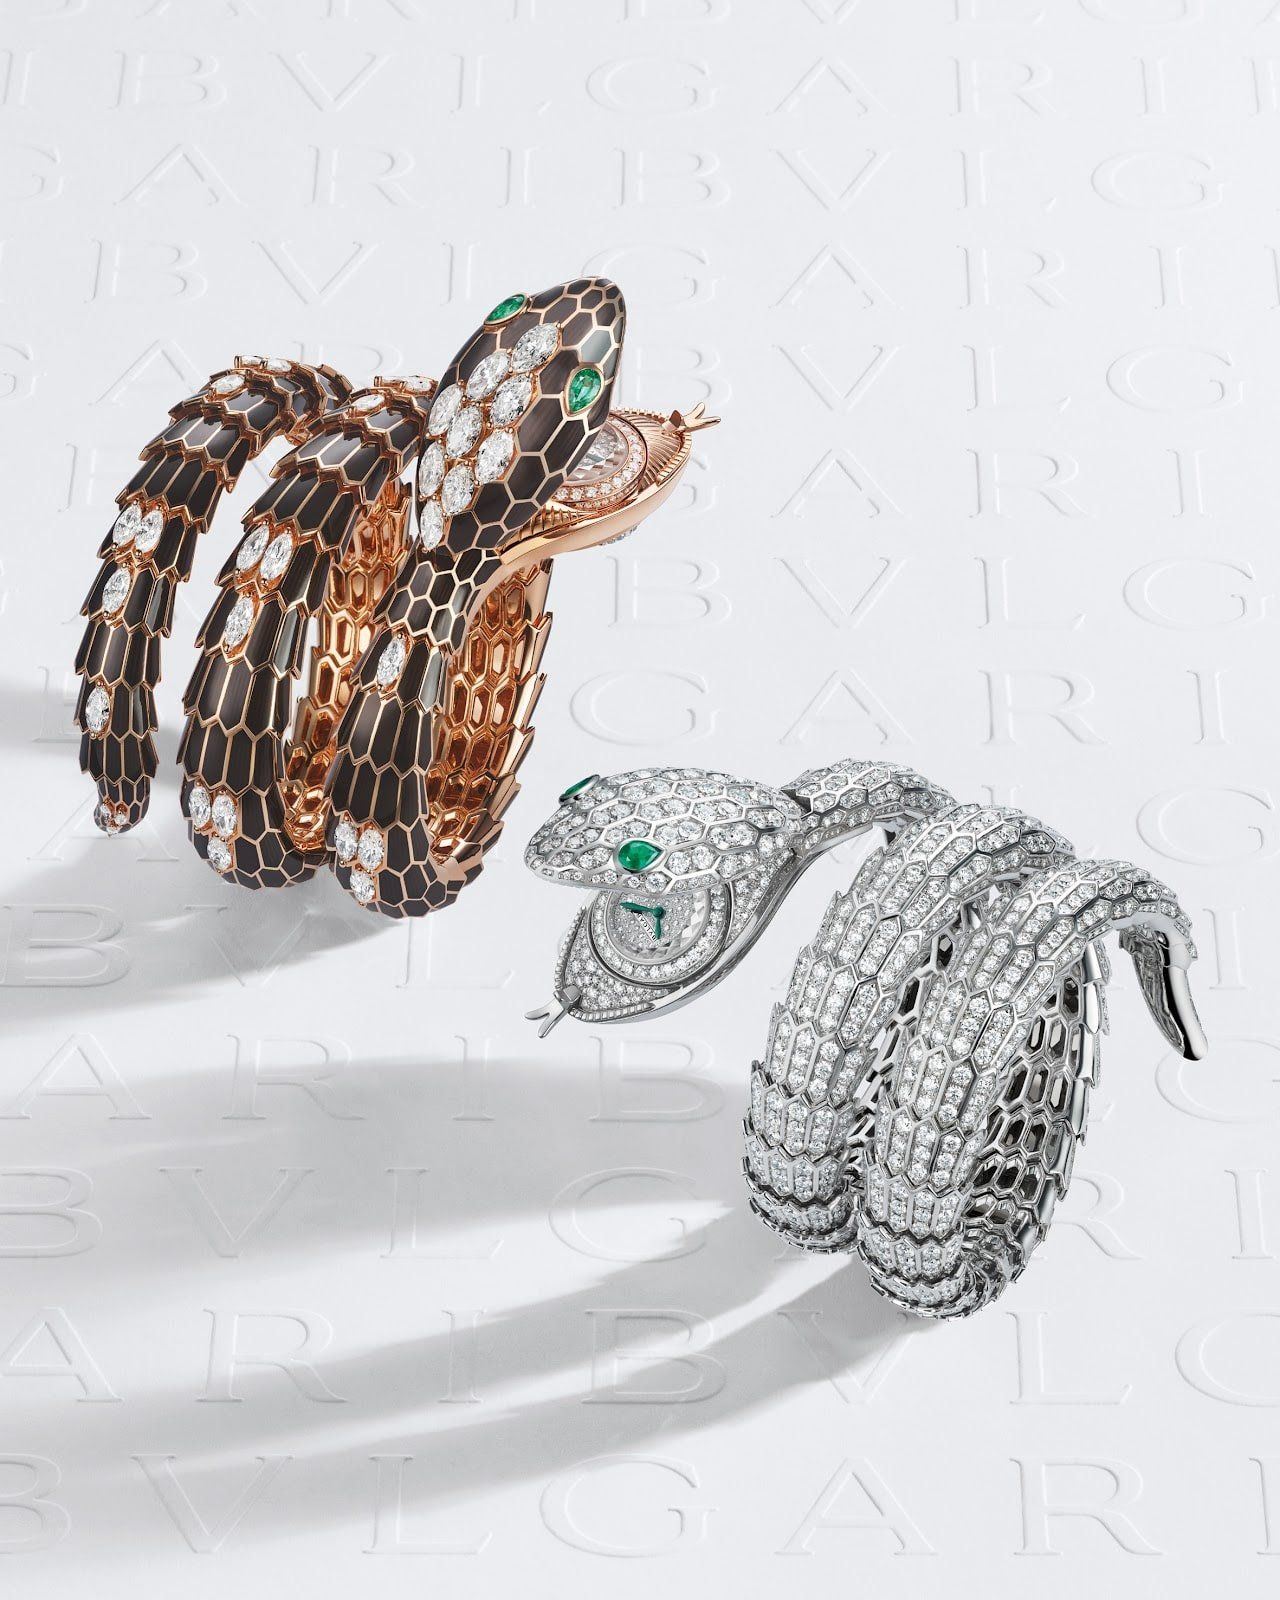 The new models of the Serpenti Misteriosi 